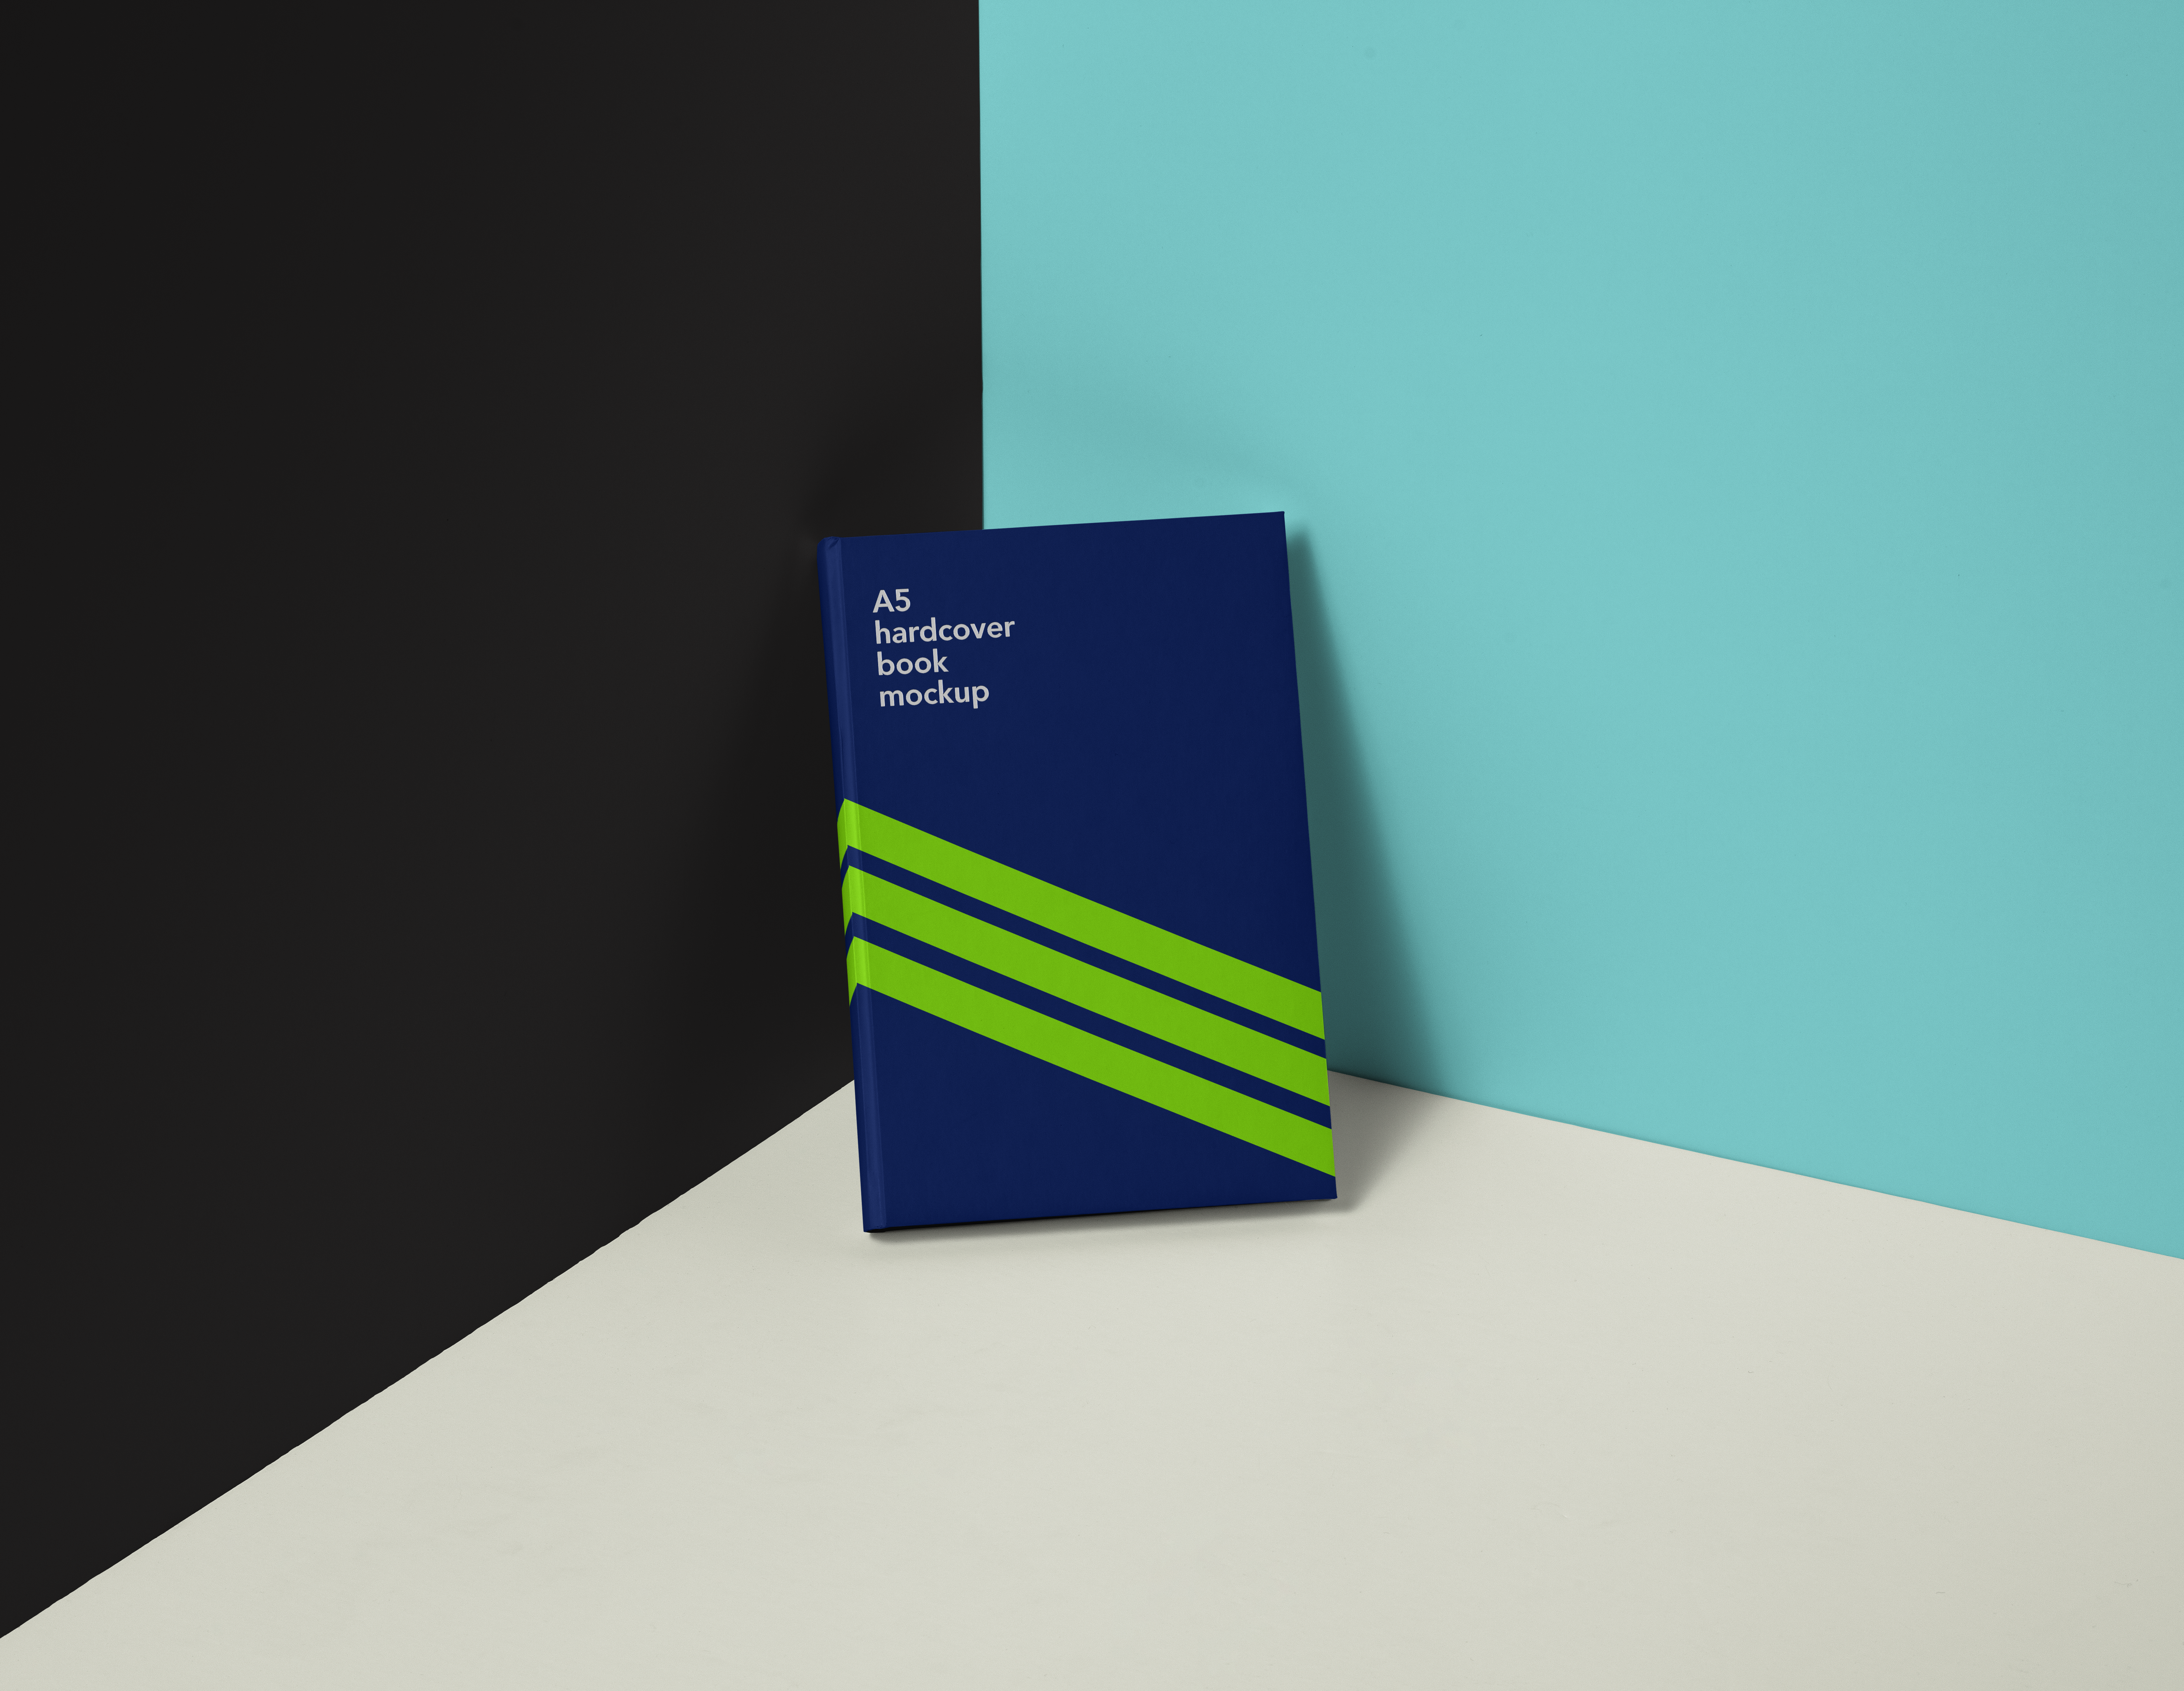 Hadcover Book Mockup Free Download